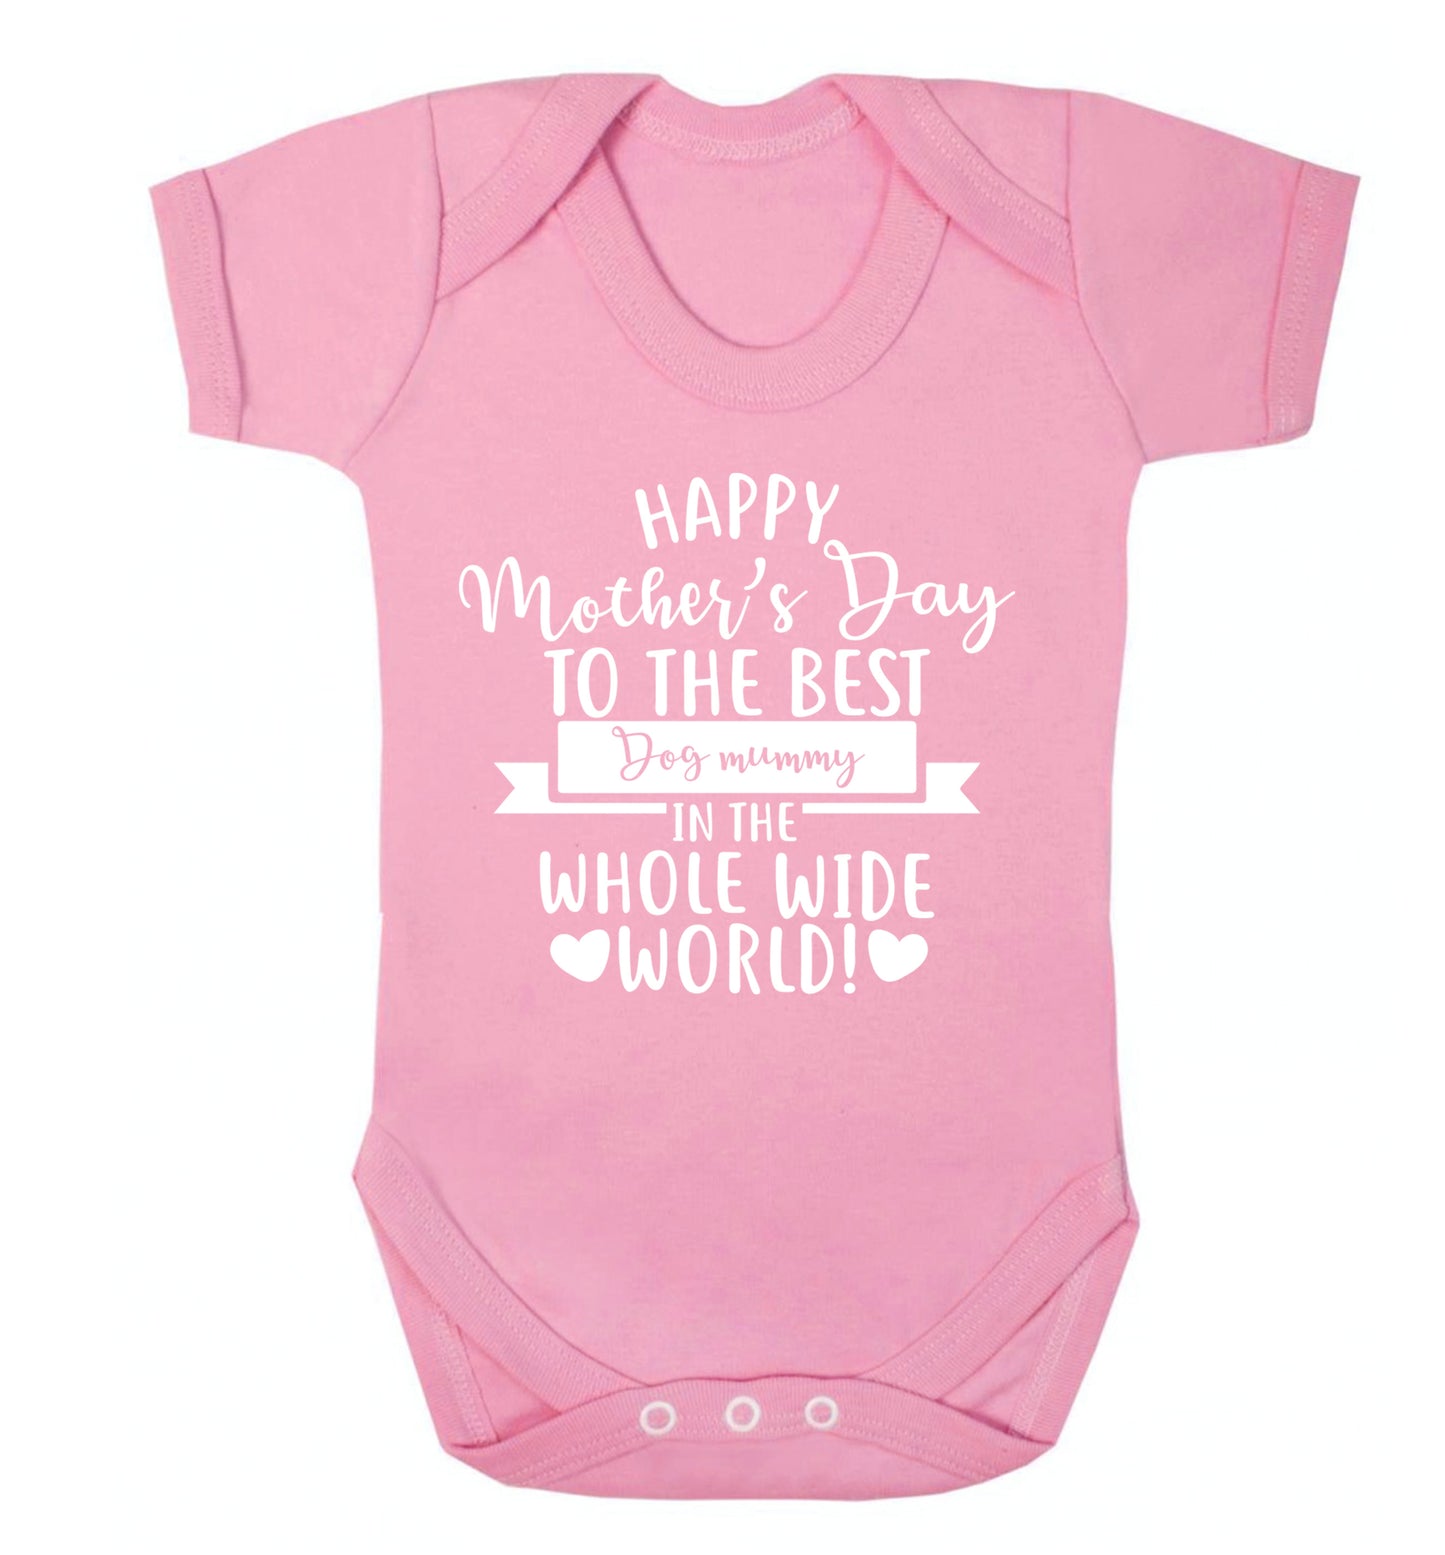 Happy mother's day to the best dog mummy in the world Baby Vest pale pink 18-24 months